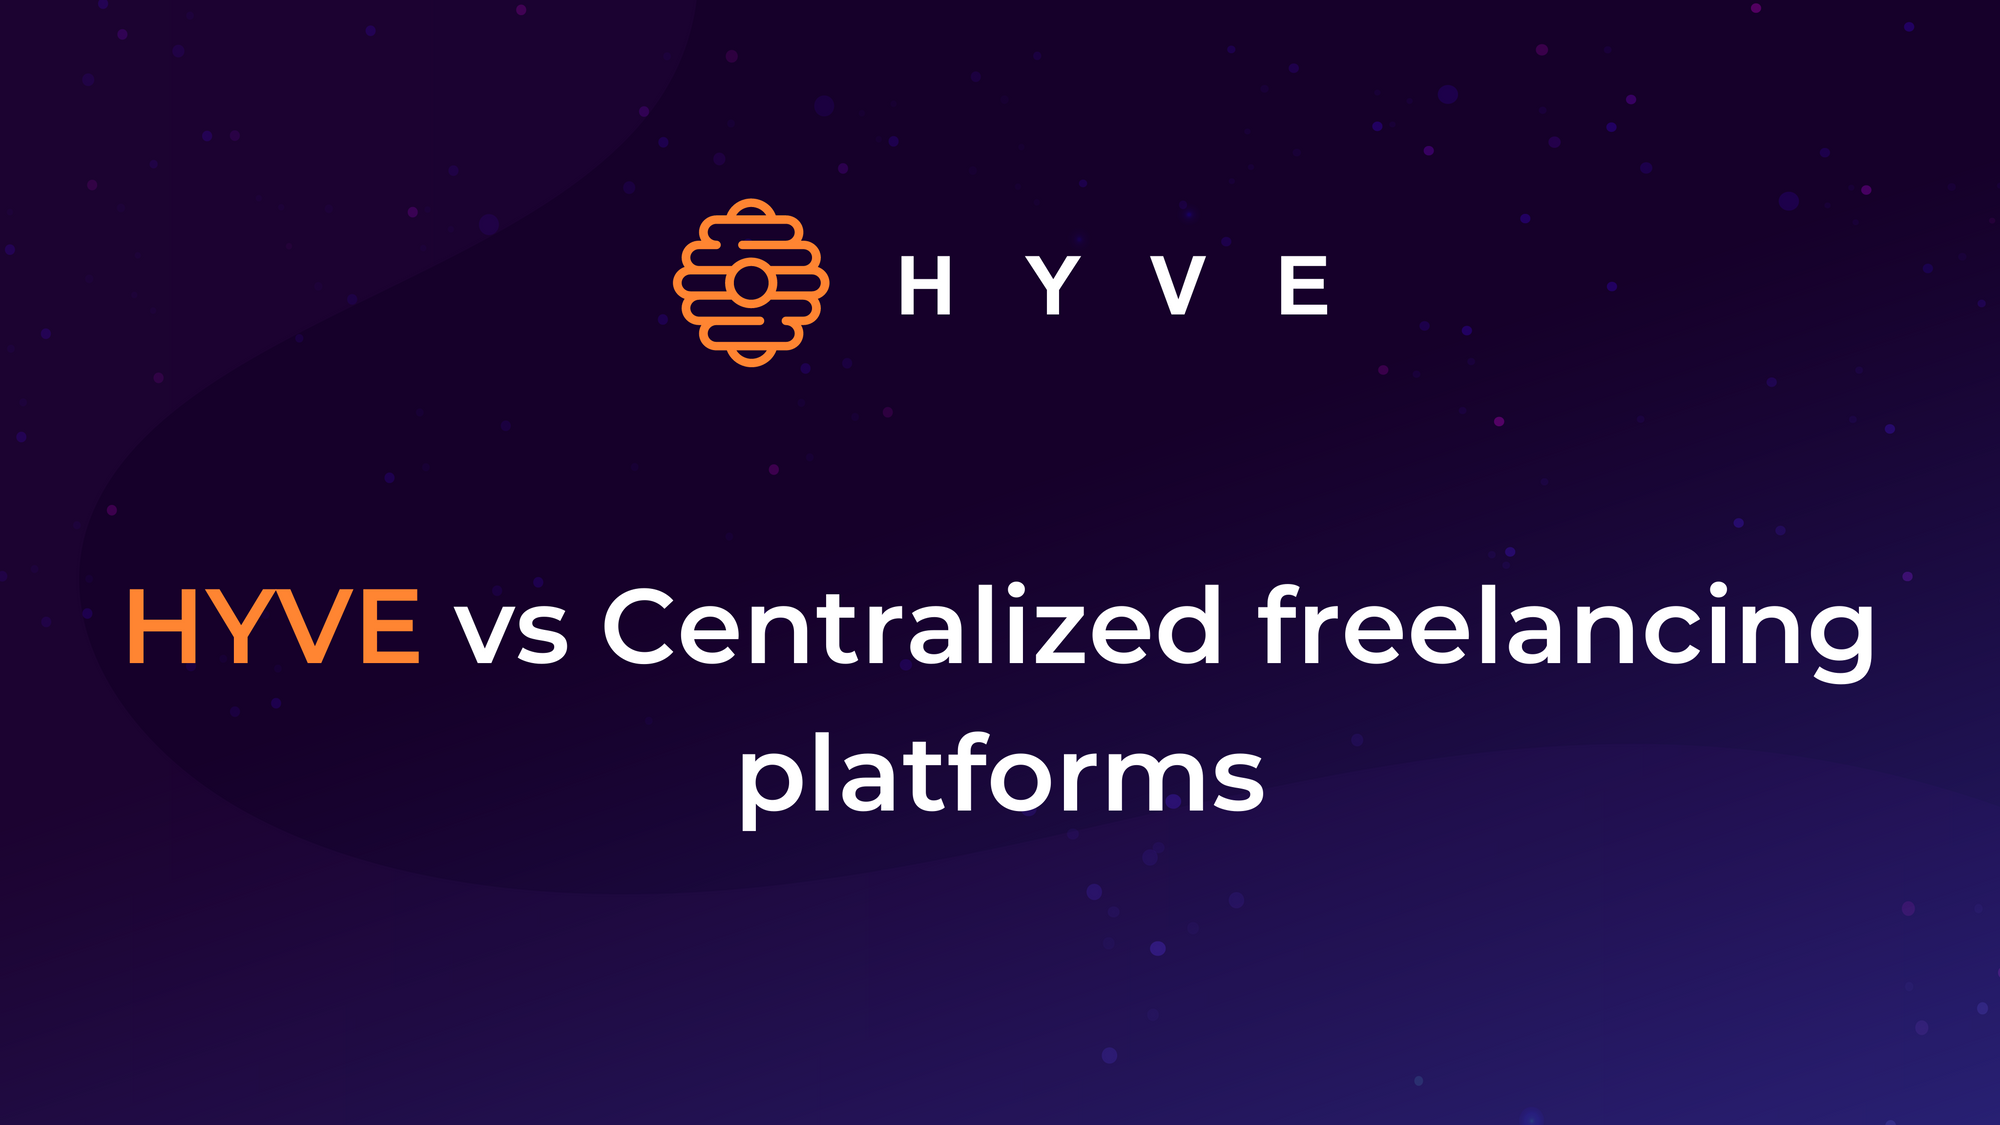 HYVE versus centralized freelancing platforms: what are the differences?